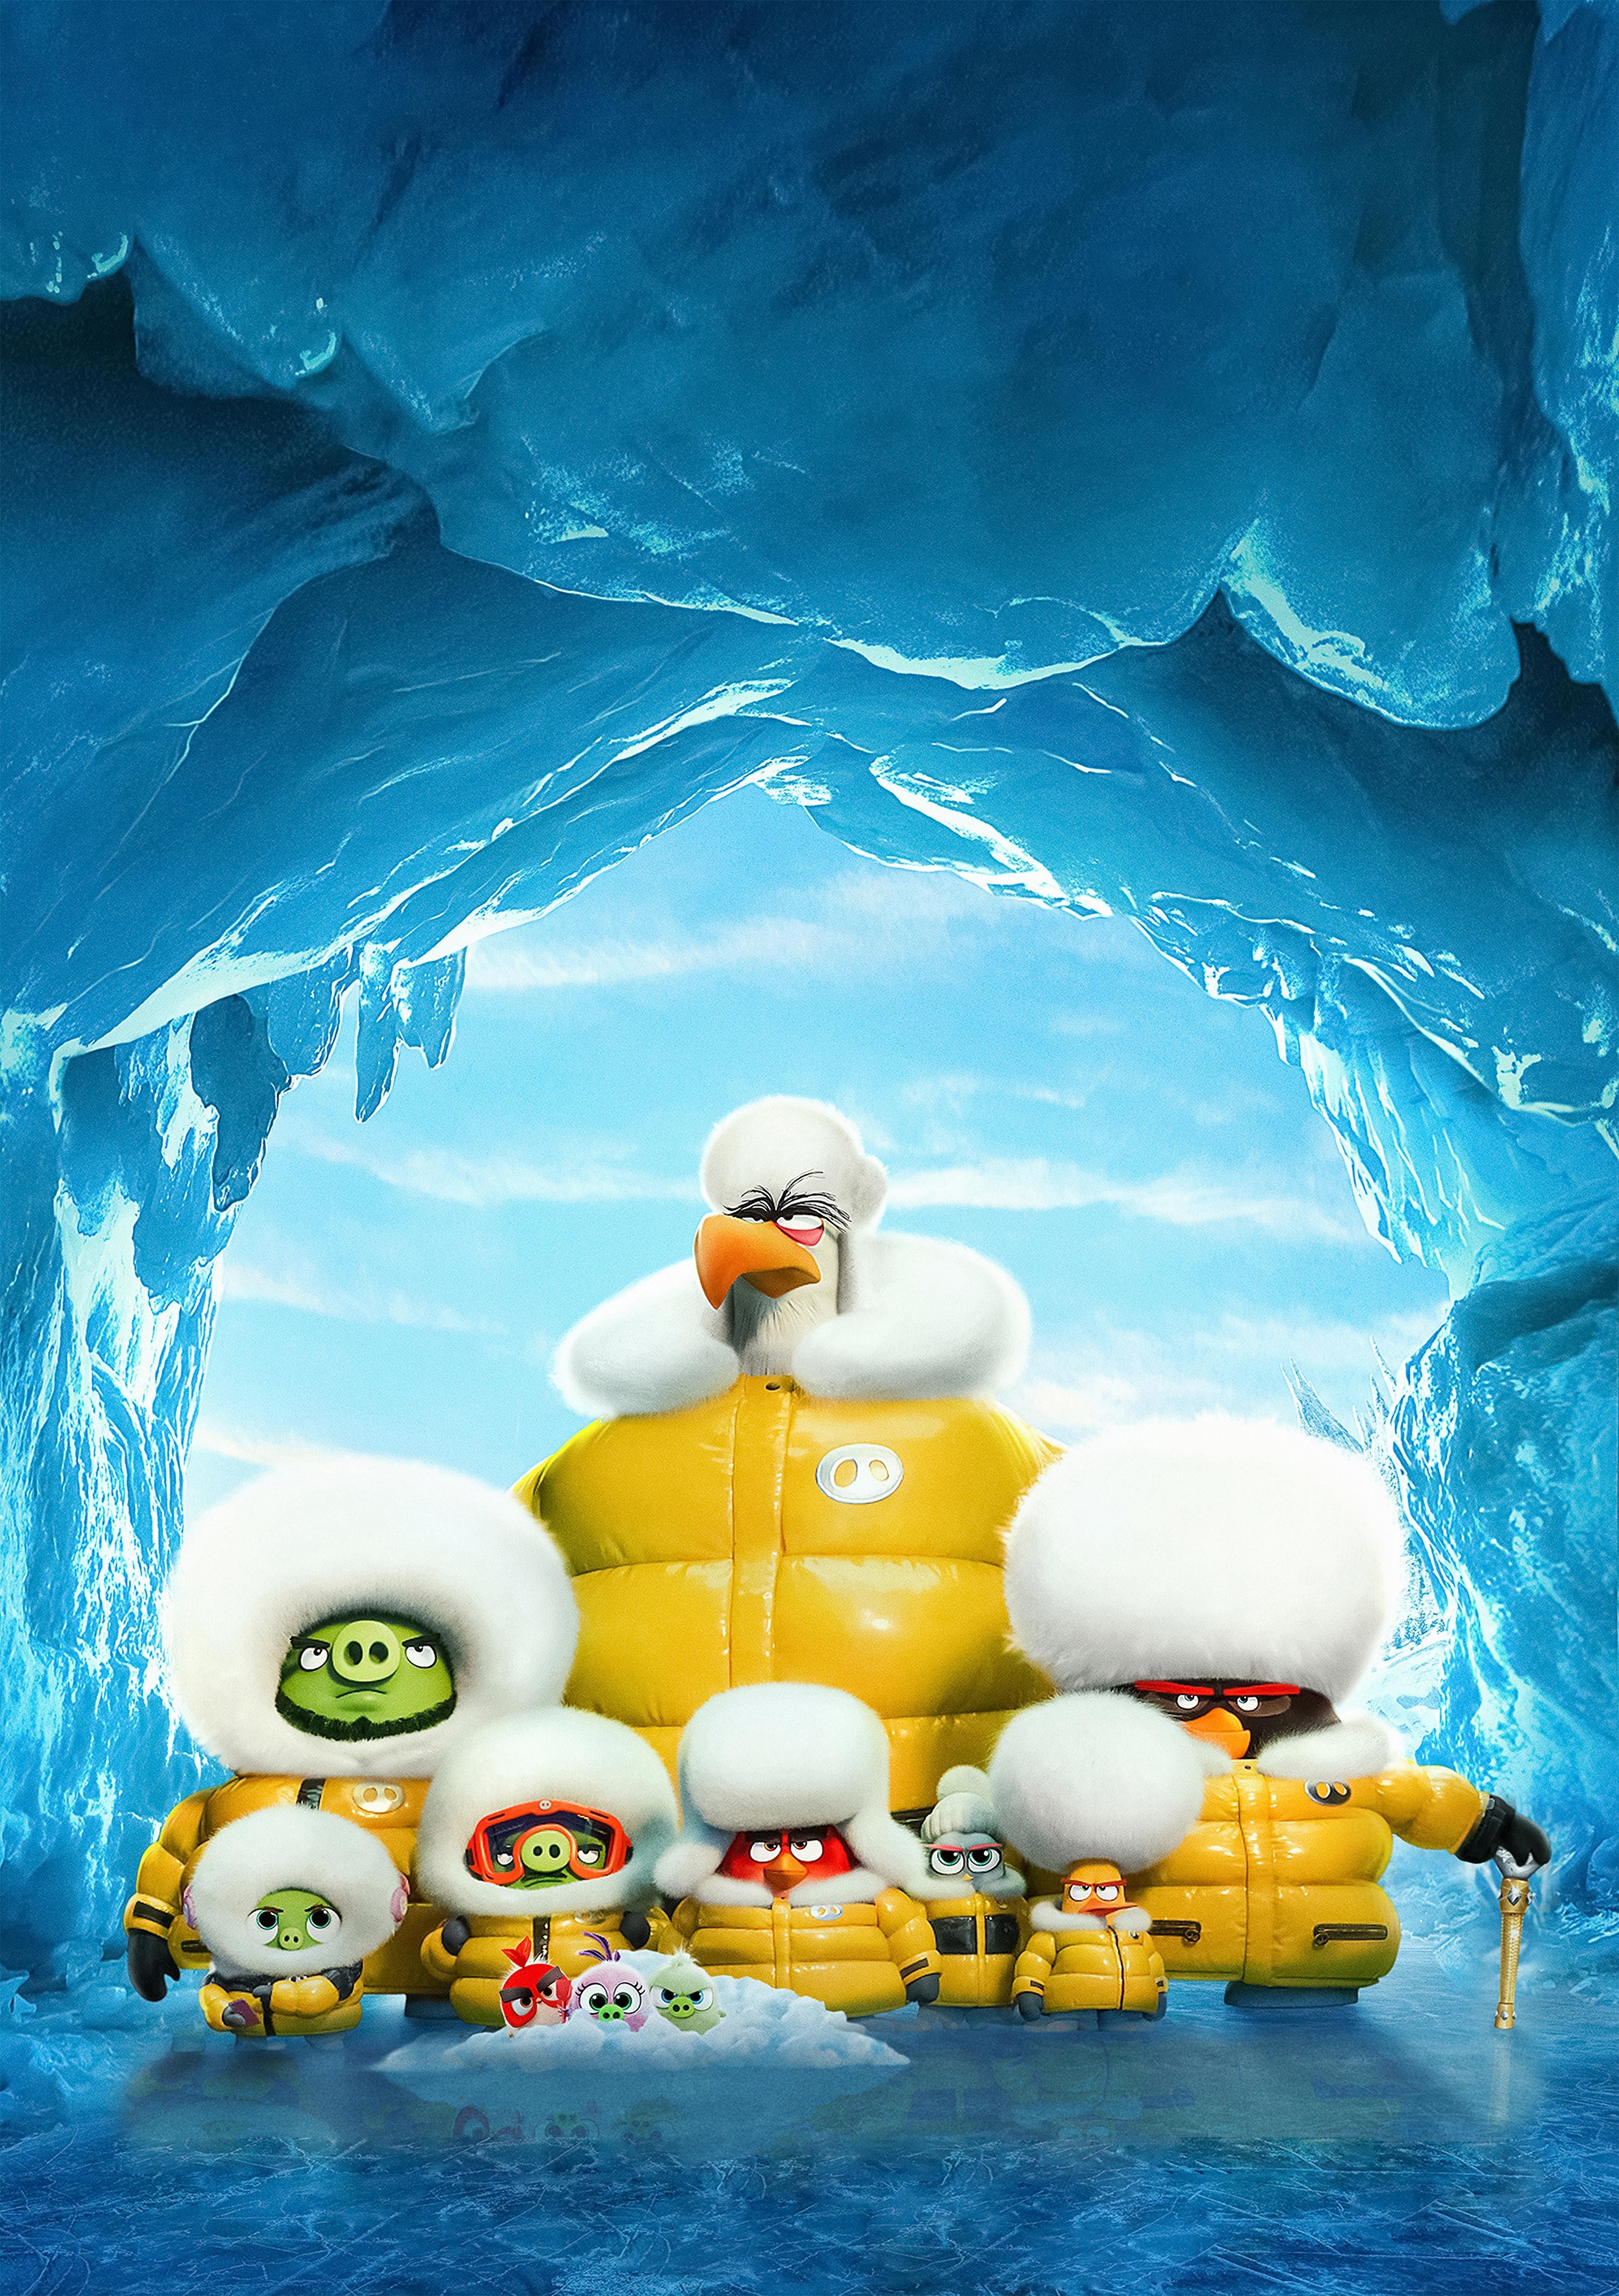 4k Angry Birds Movie 2 Wallpaper, HD Movies 4K Wallpaper, Image, Photo and Background